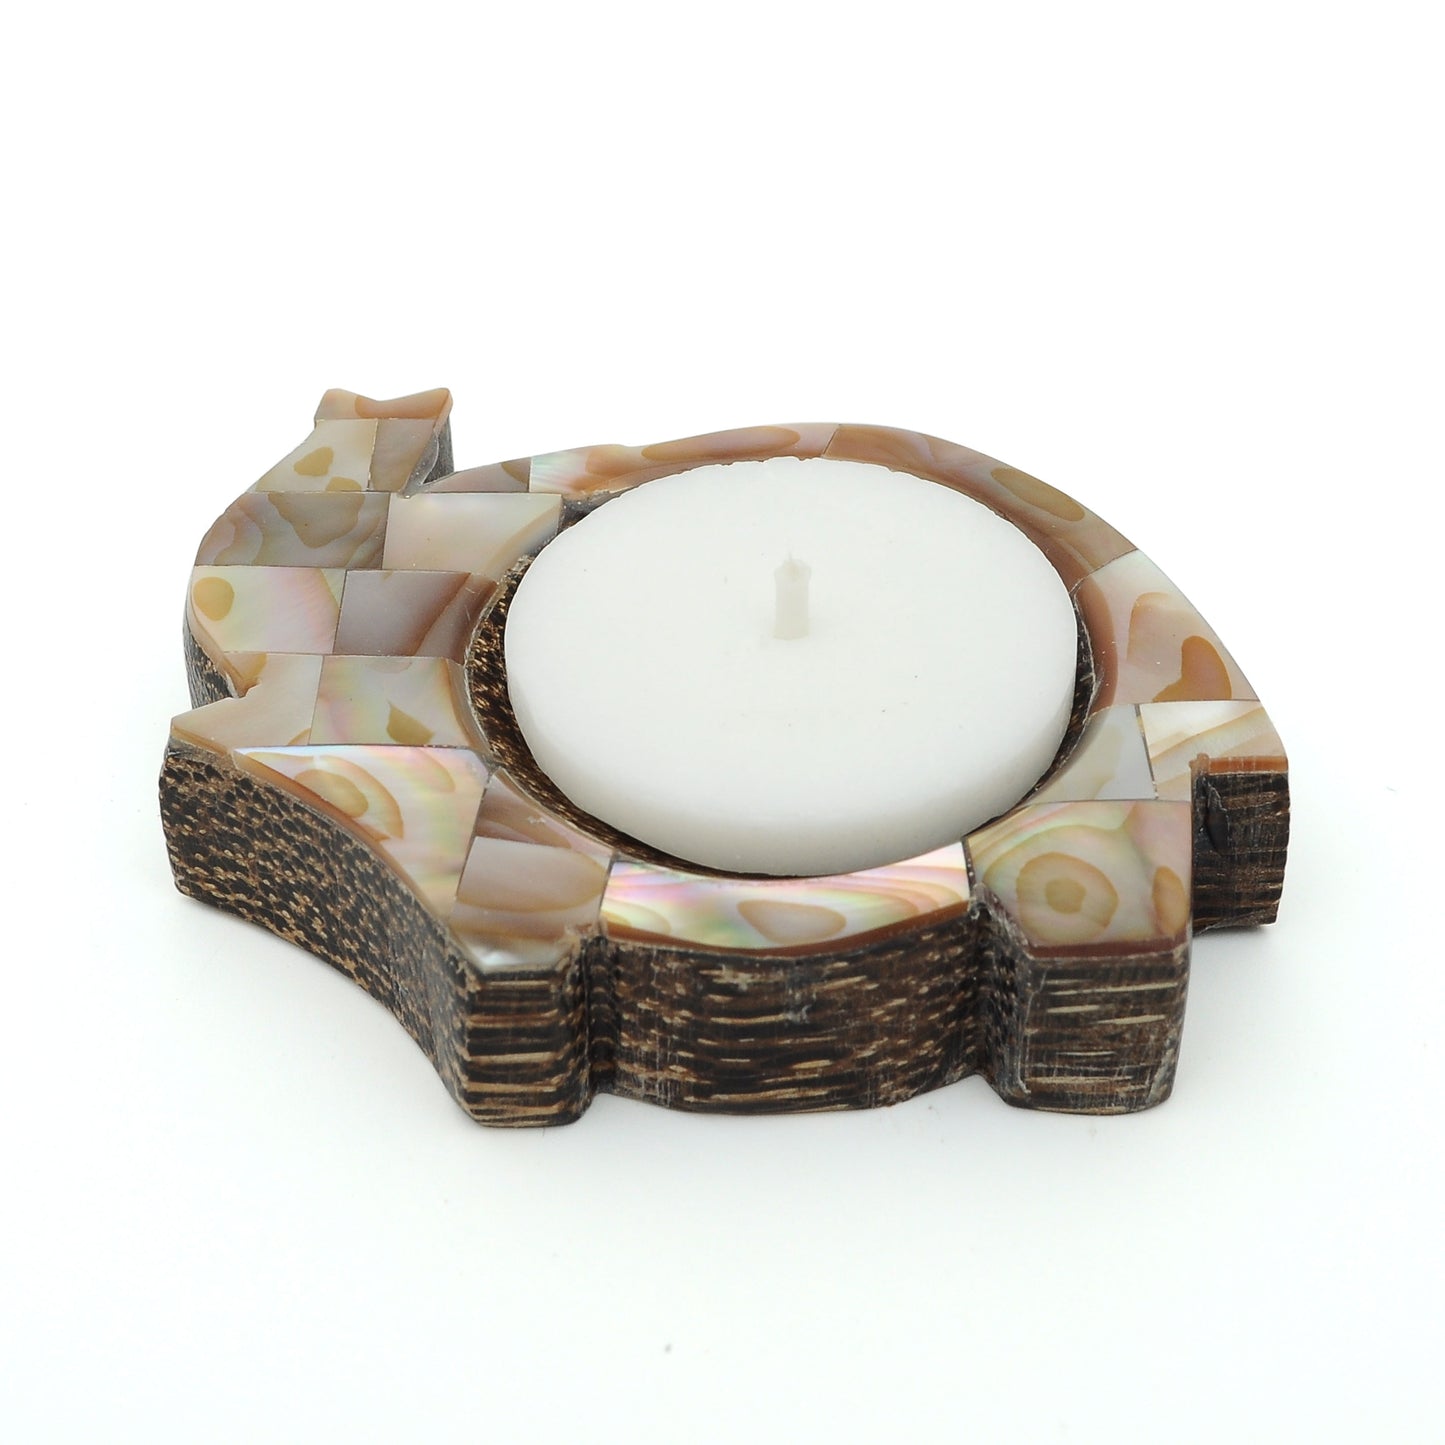 Elephant Shaped Palm Wood Tealight Candle Holder White Mother of Pearl Inlay